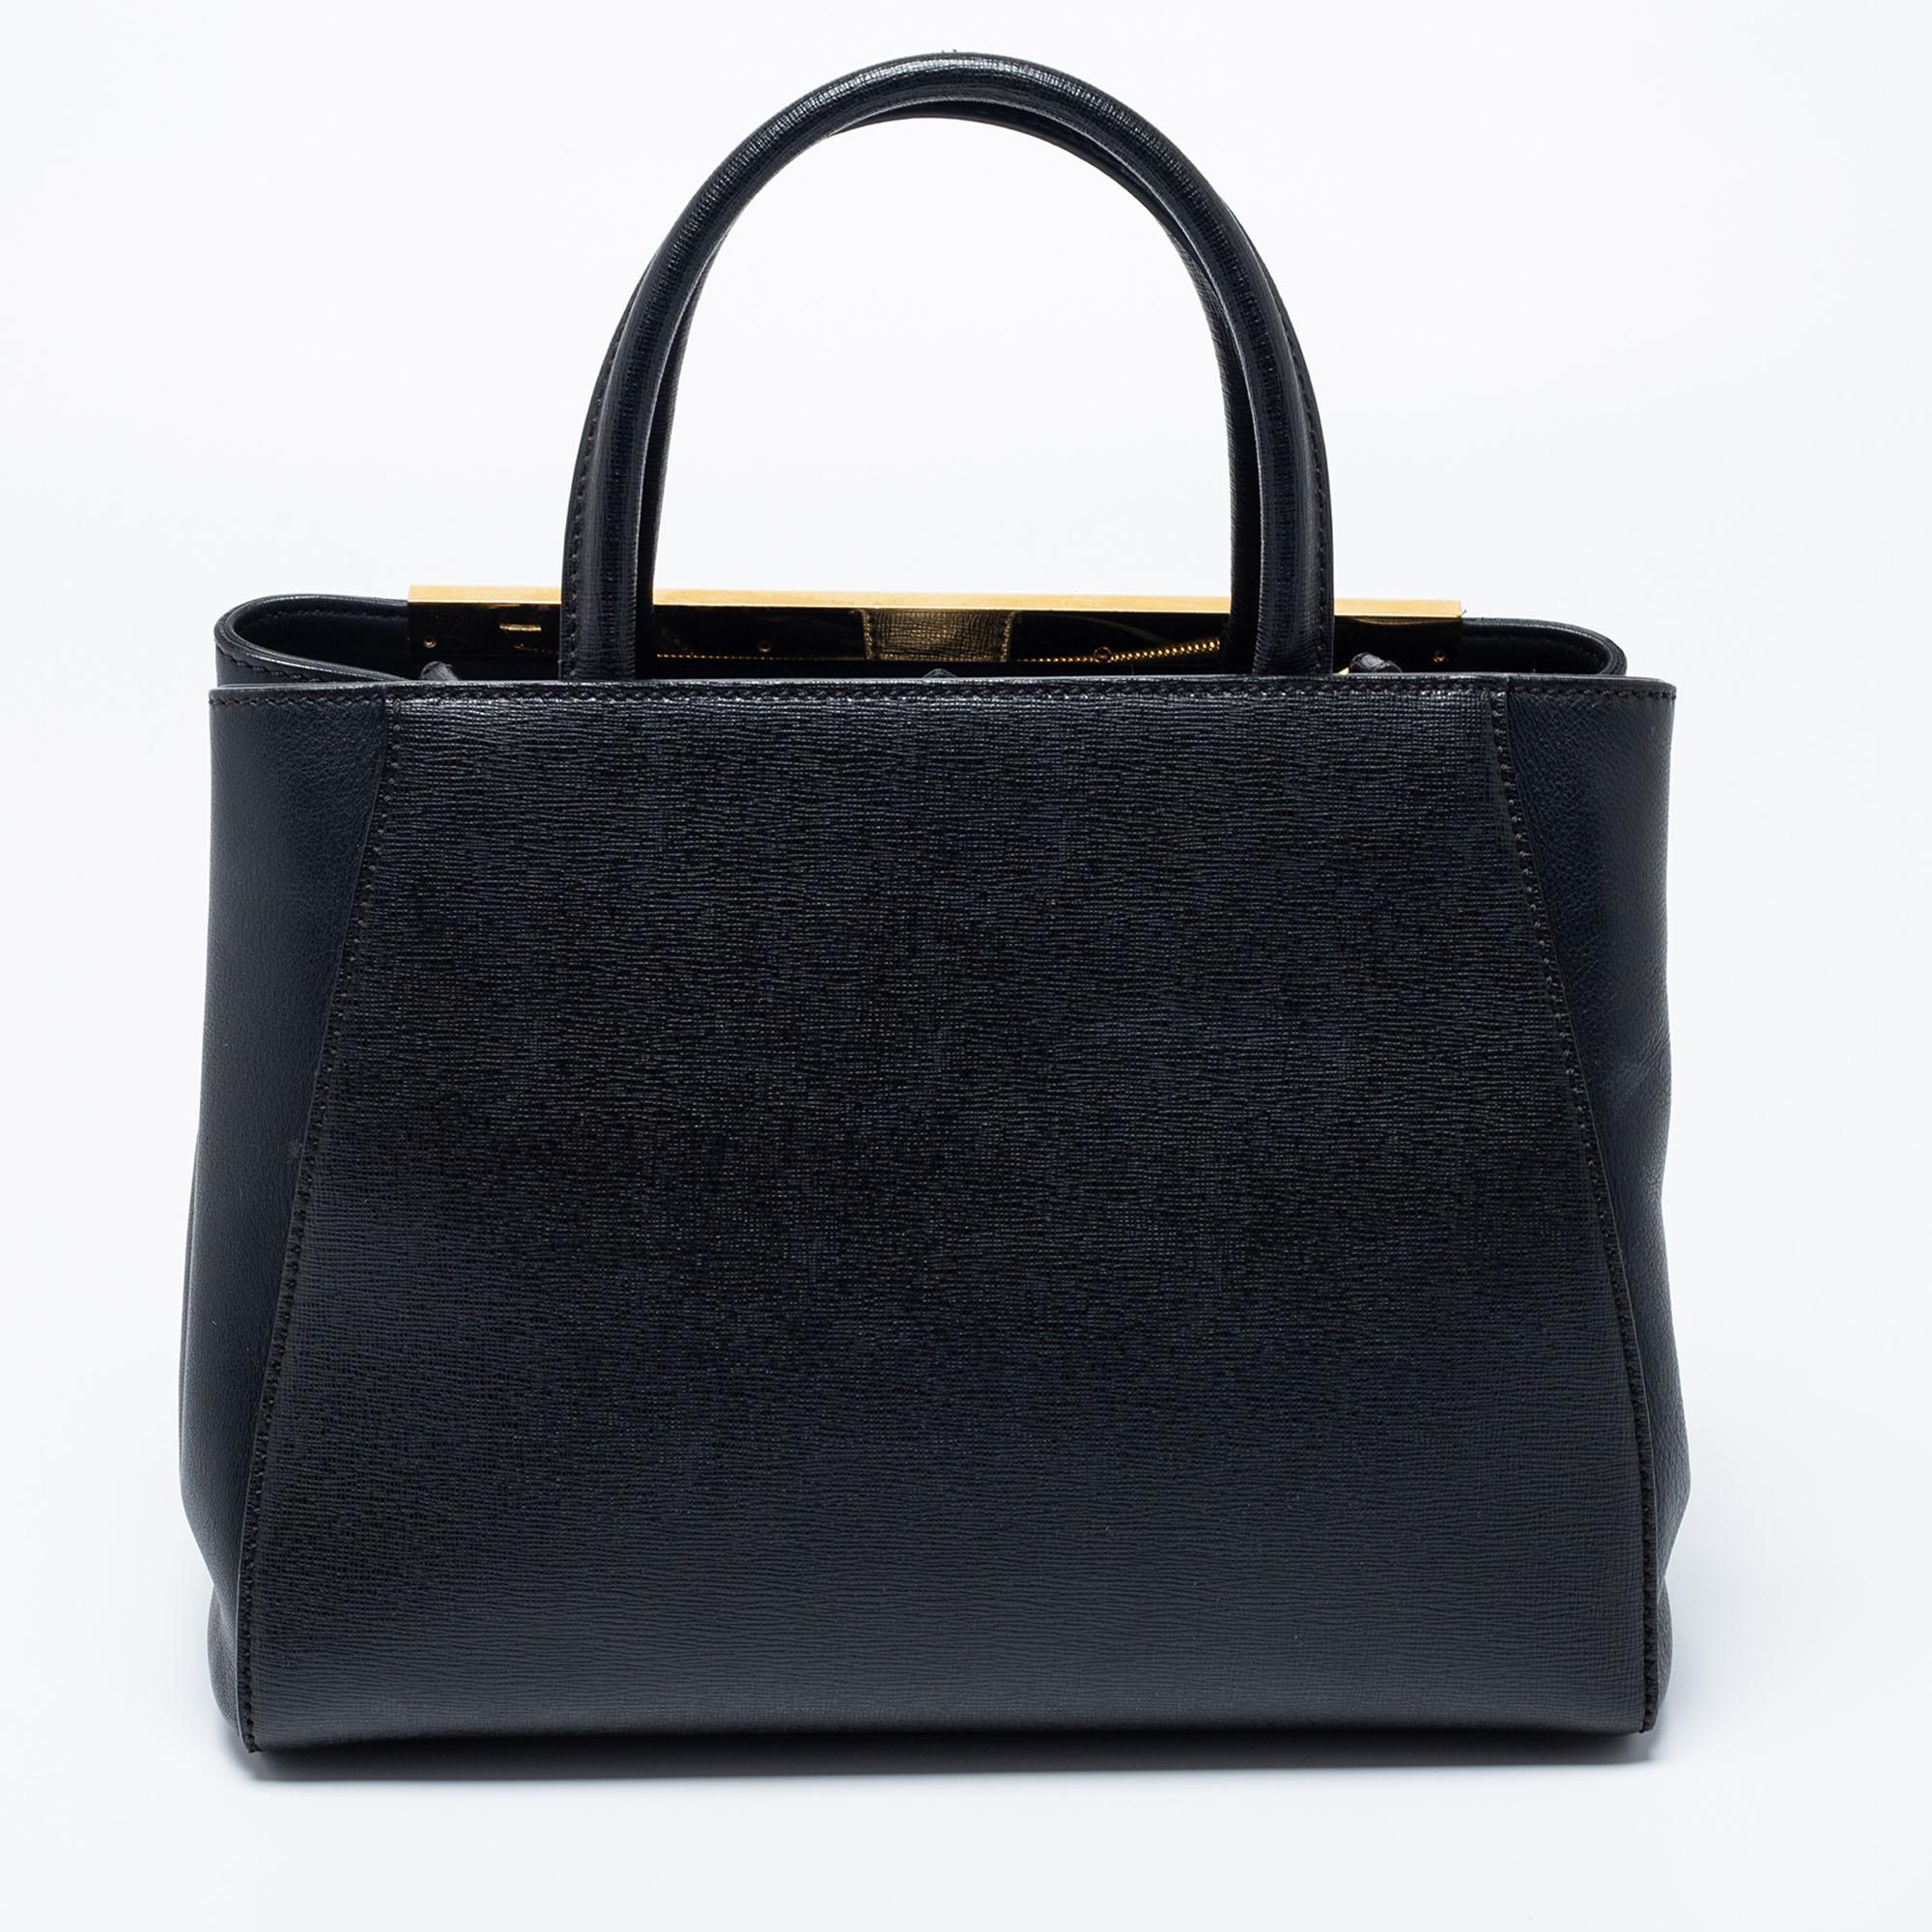 Fendi's 2Jours tote is one of the most iconic designs from the label and it continues to receive the love of women around the world. Crafted from black leather, the bag features double-rolled handles and a shoulder strap. It is equipped with a